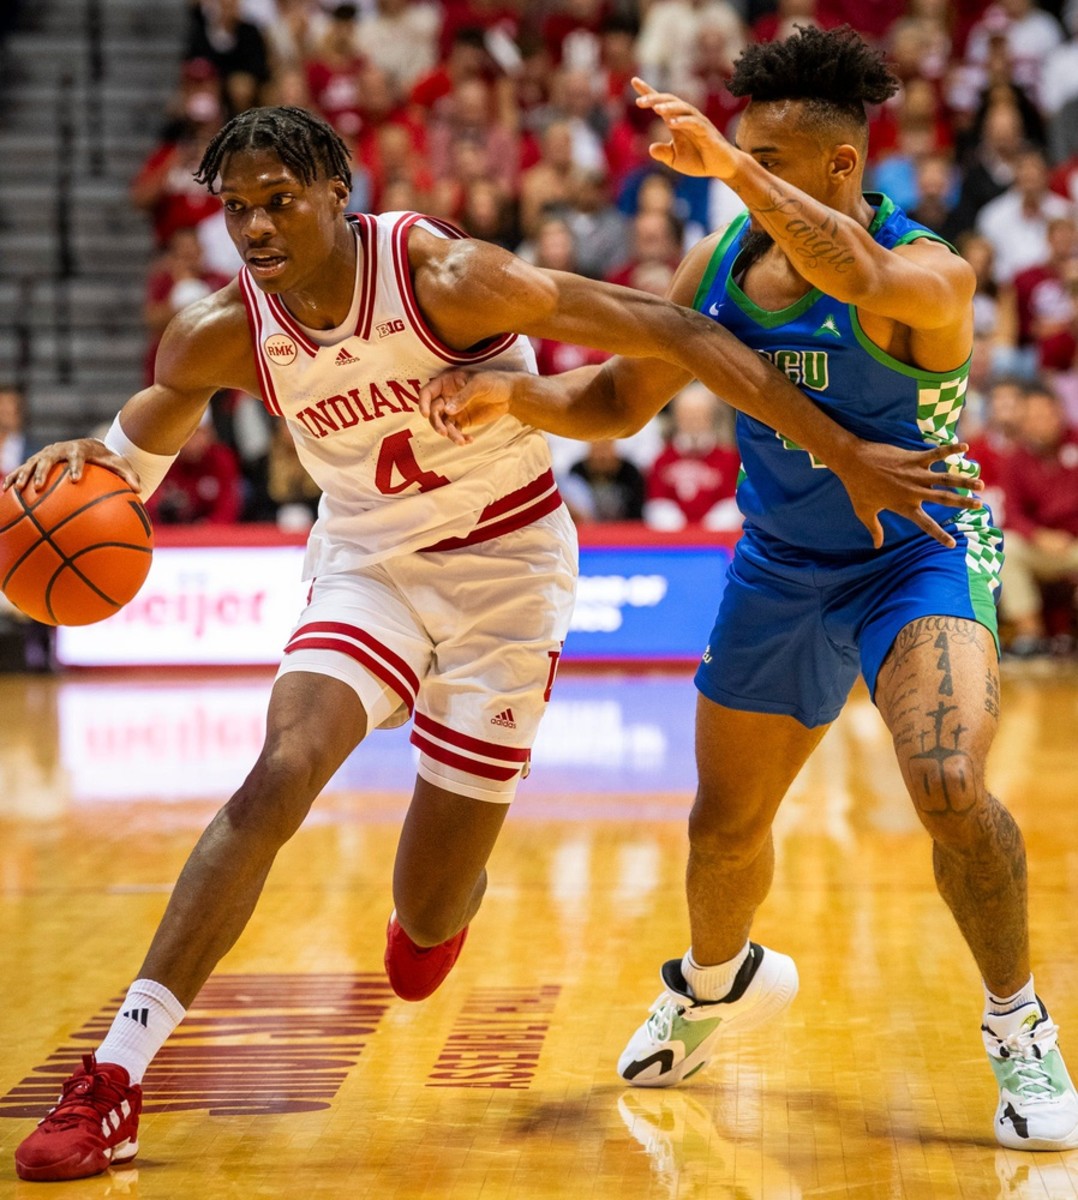 Indiana's Anthony Walker (4) drives during the first half of the Indiana versus Florida Gulf Coast men's basketball game at Simon Skjodt Assembly Hall.